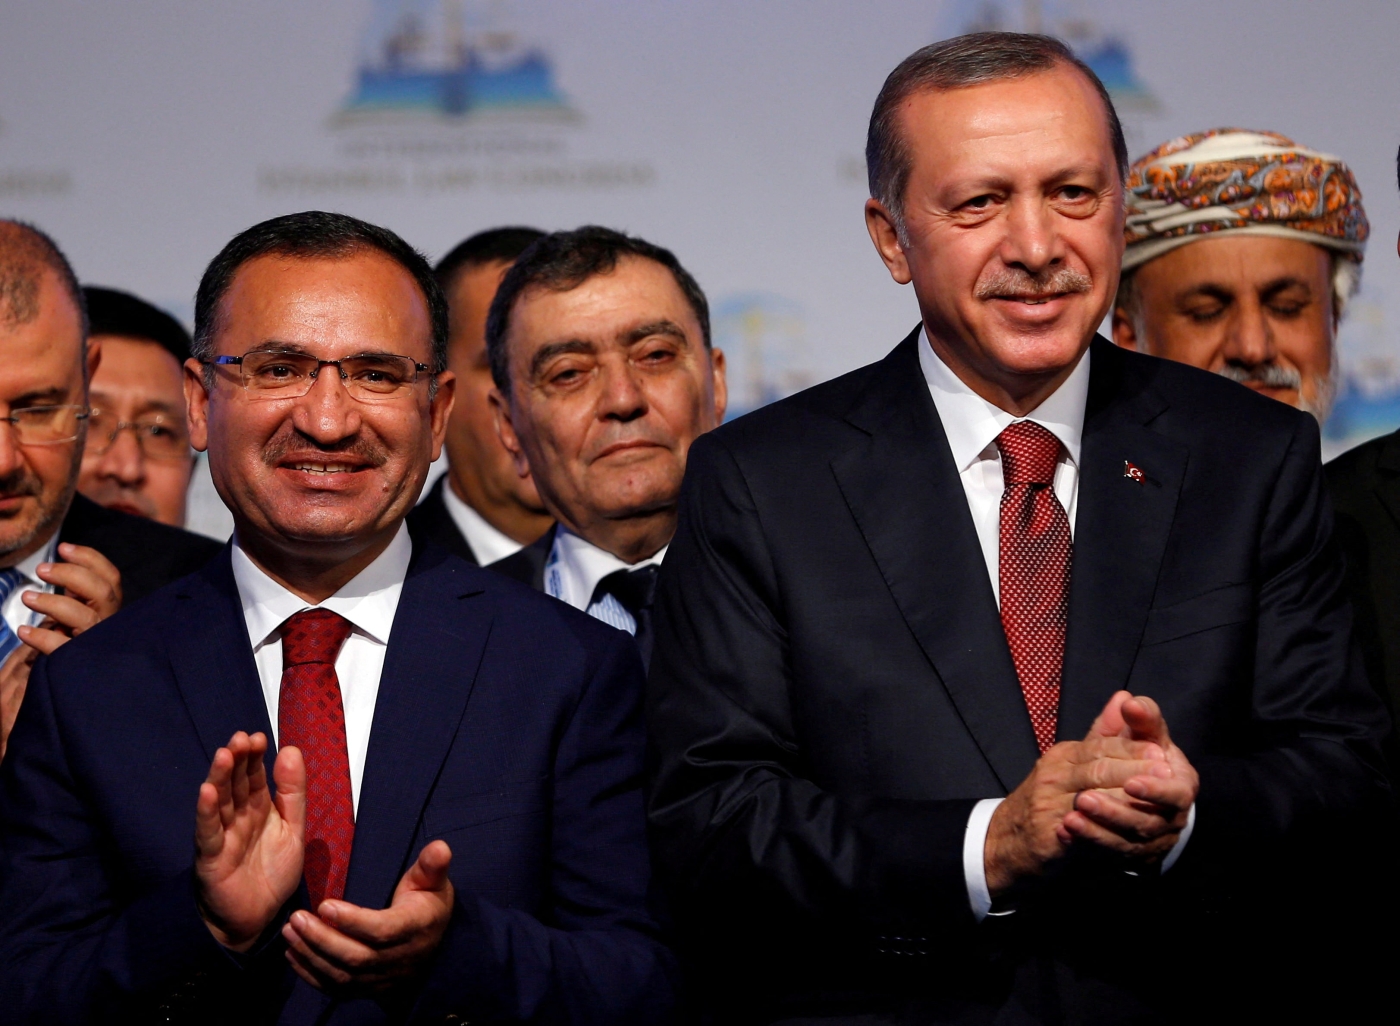 Turkish President Tayyip Erdogan (R) is pictured with Turkish Justice Minister Bekir Bozdag during the International Istanbul Law Congress in Istanbul, Turkey, 17 October 2016 (Reuters)